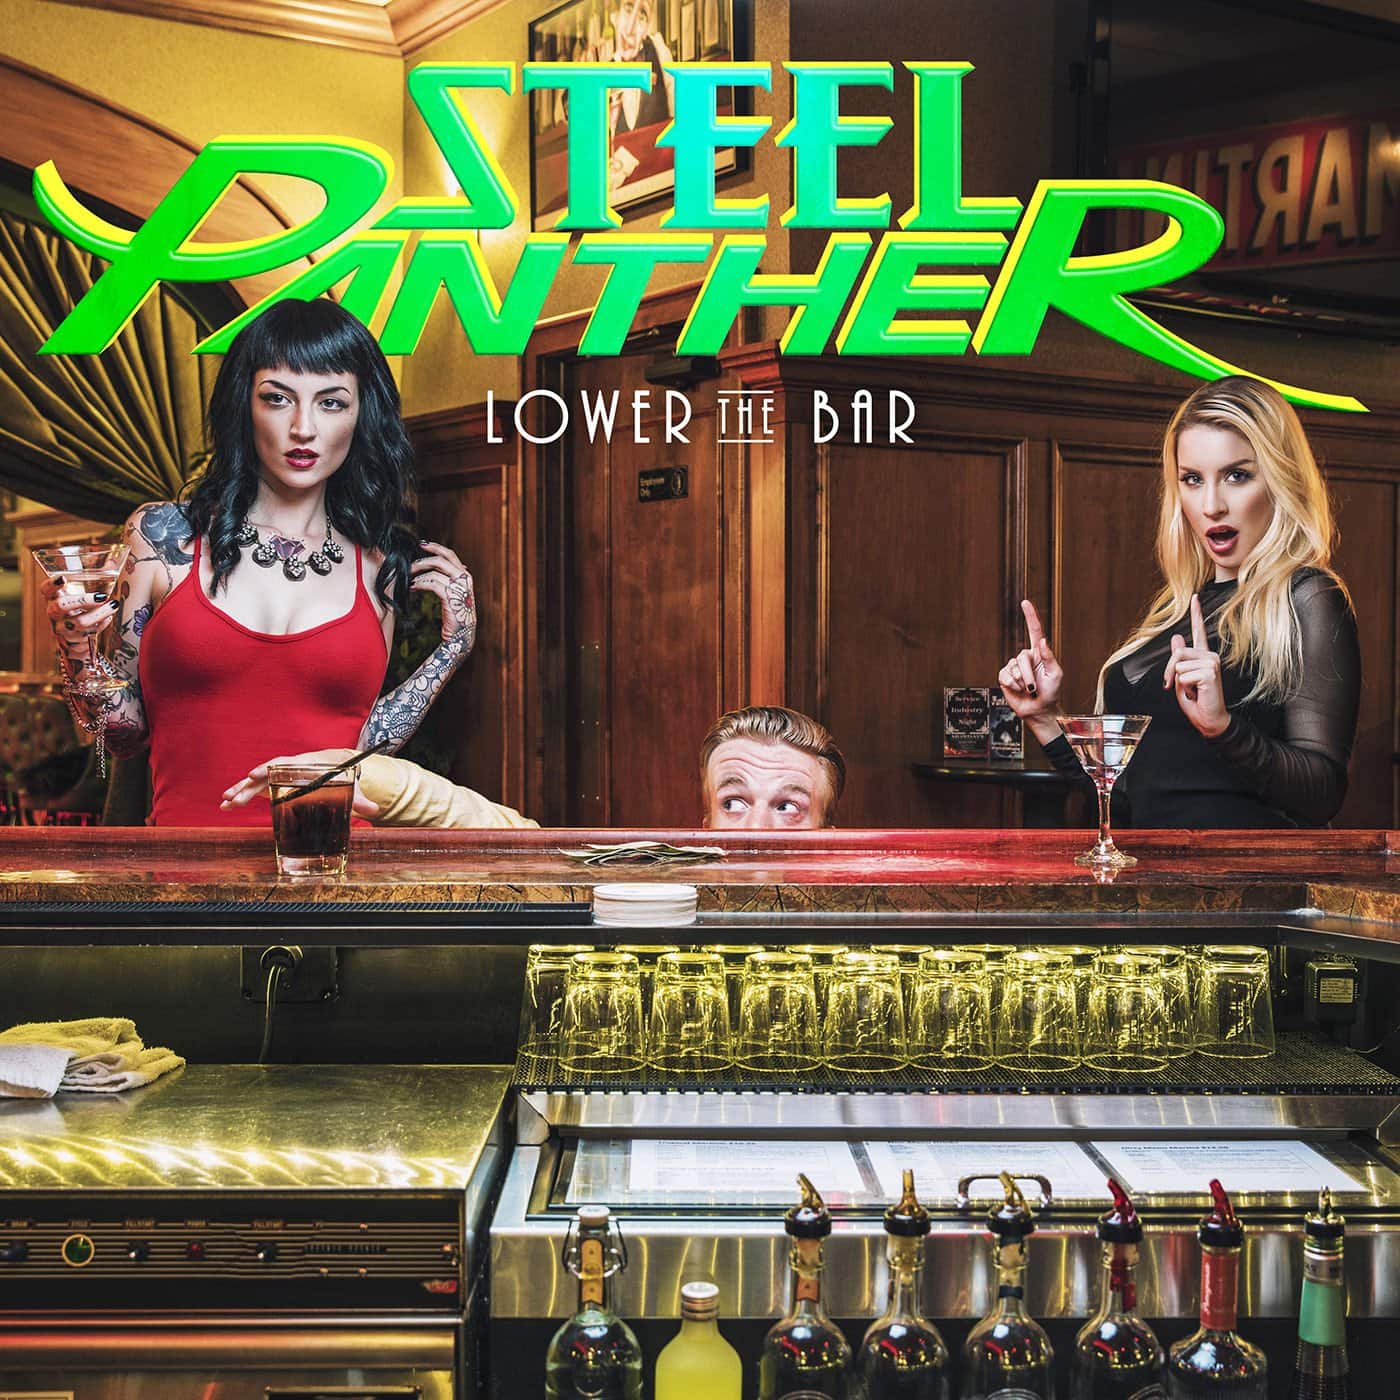 Steel Panther's Lower the Bar